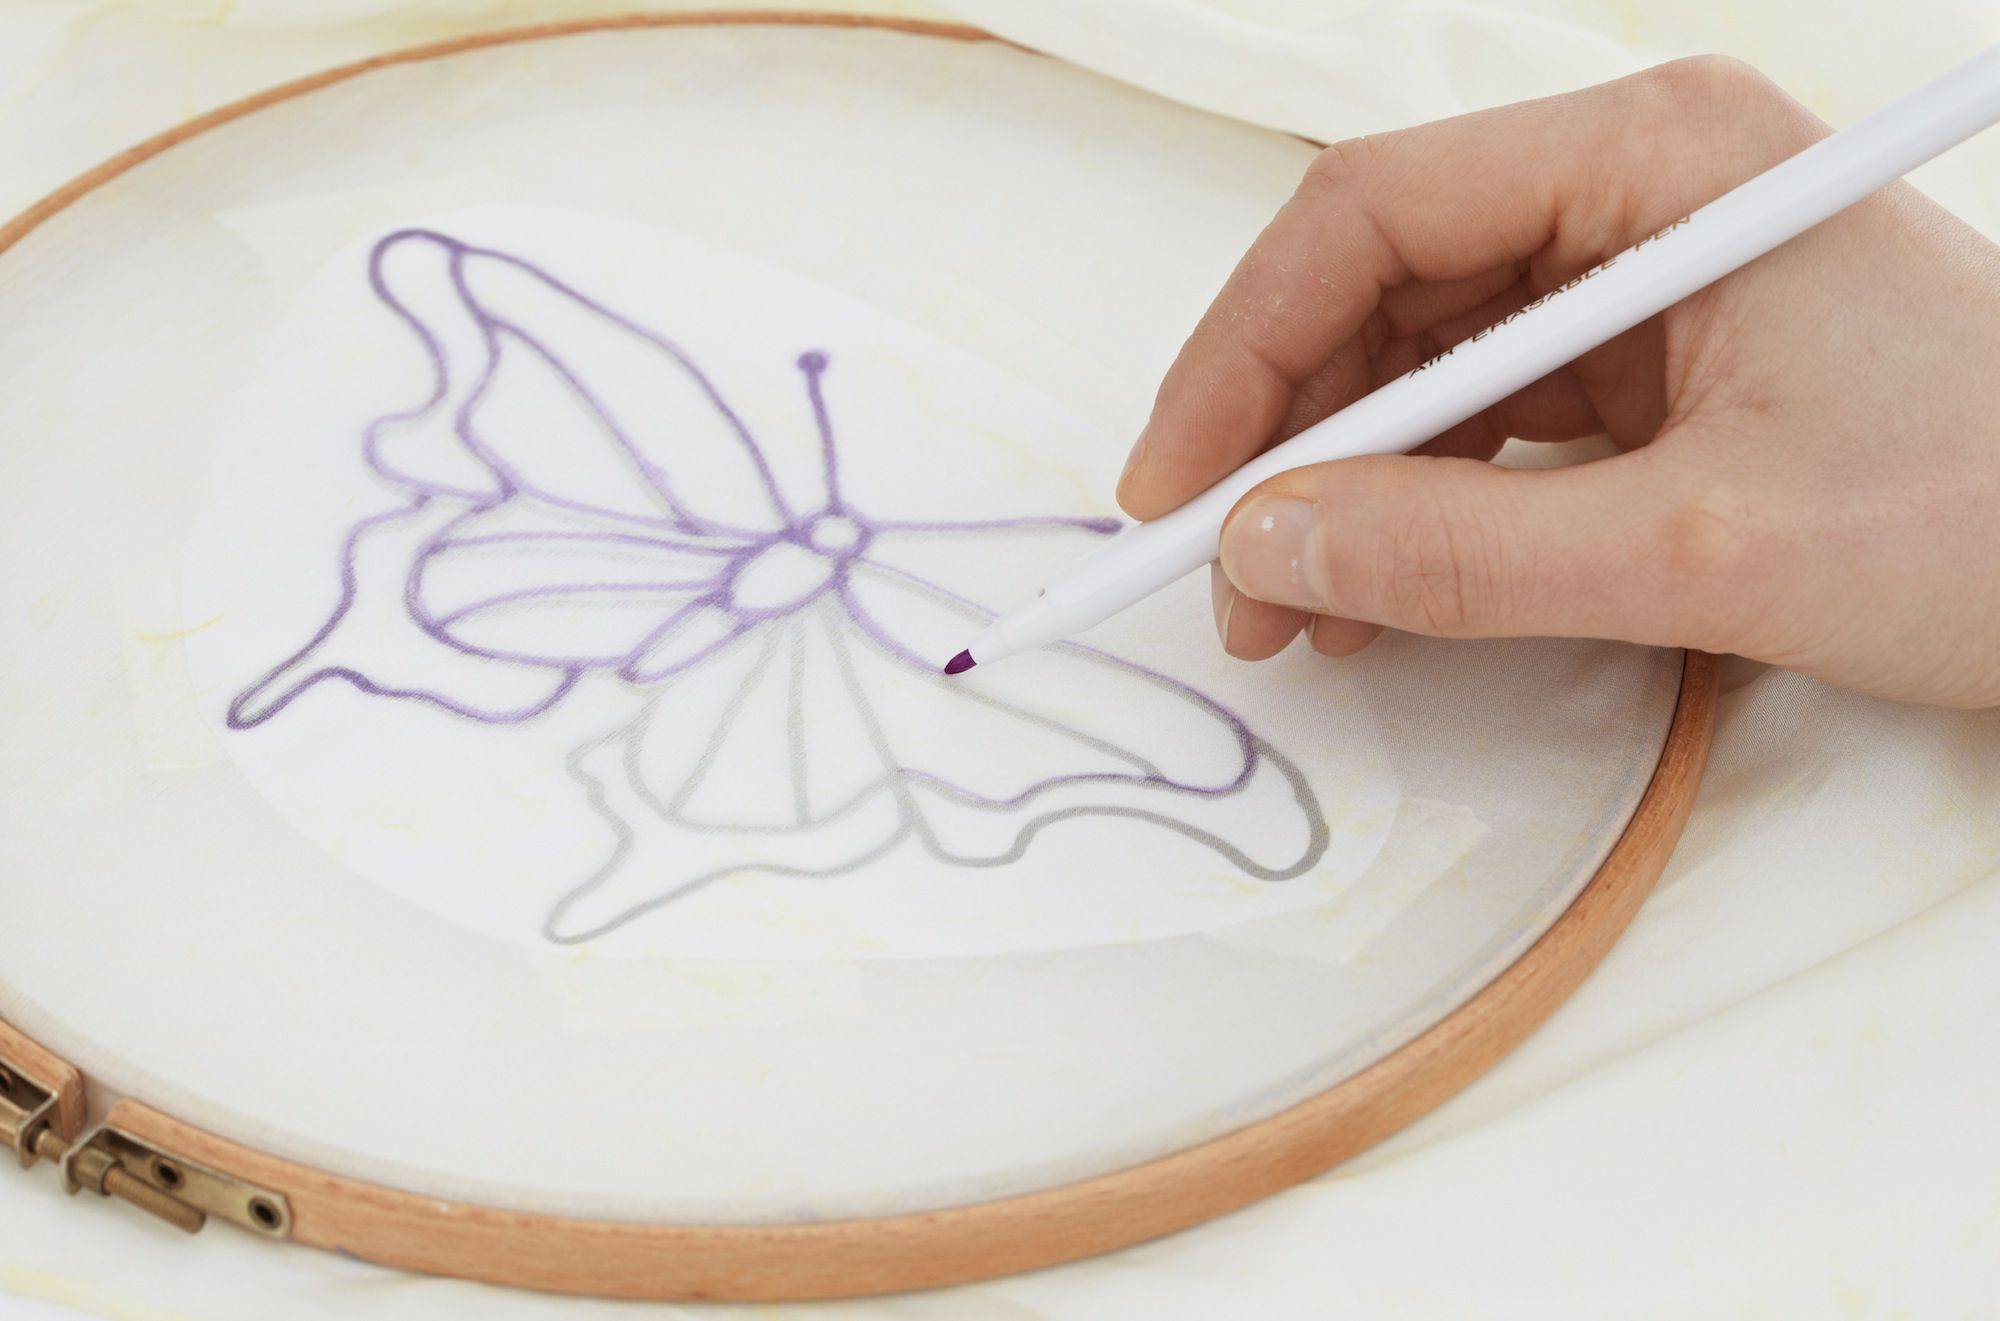 Transfer Patterns For Hand Embroidery 7 Methods For Marking Or Transferring Embroidery Patterns